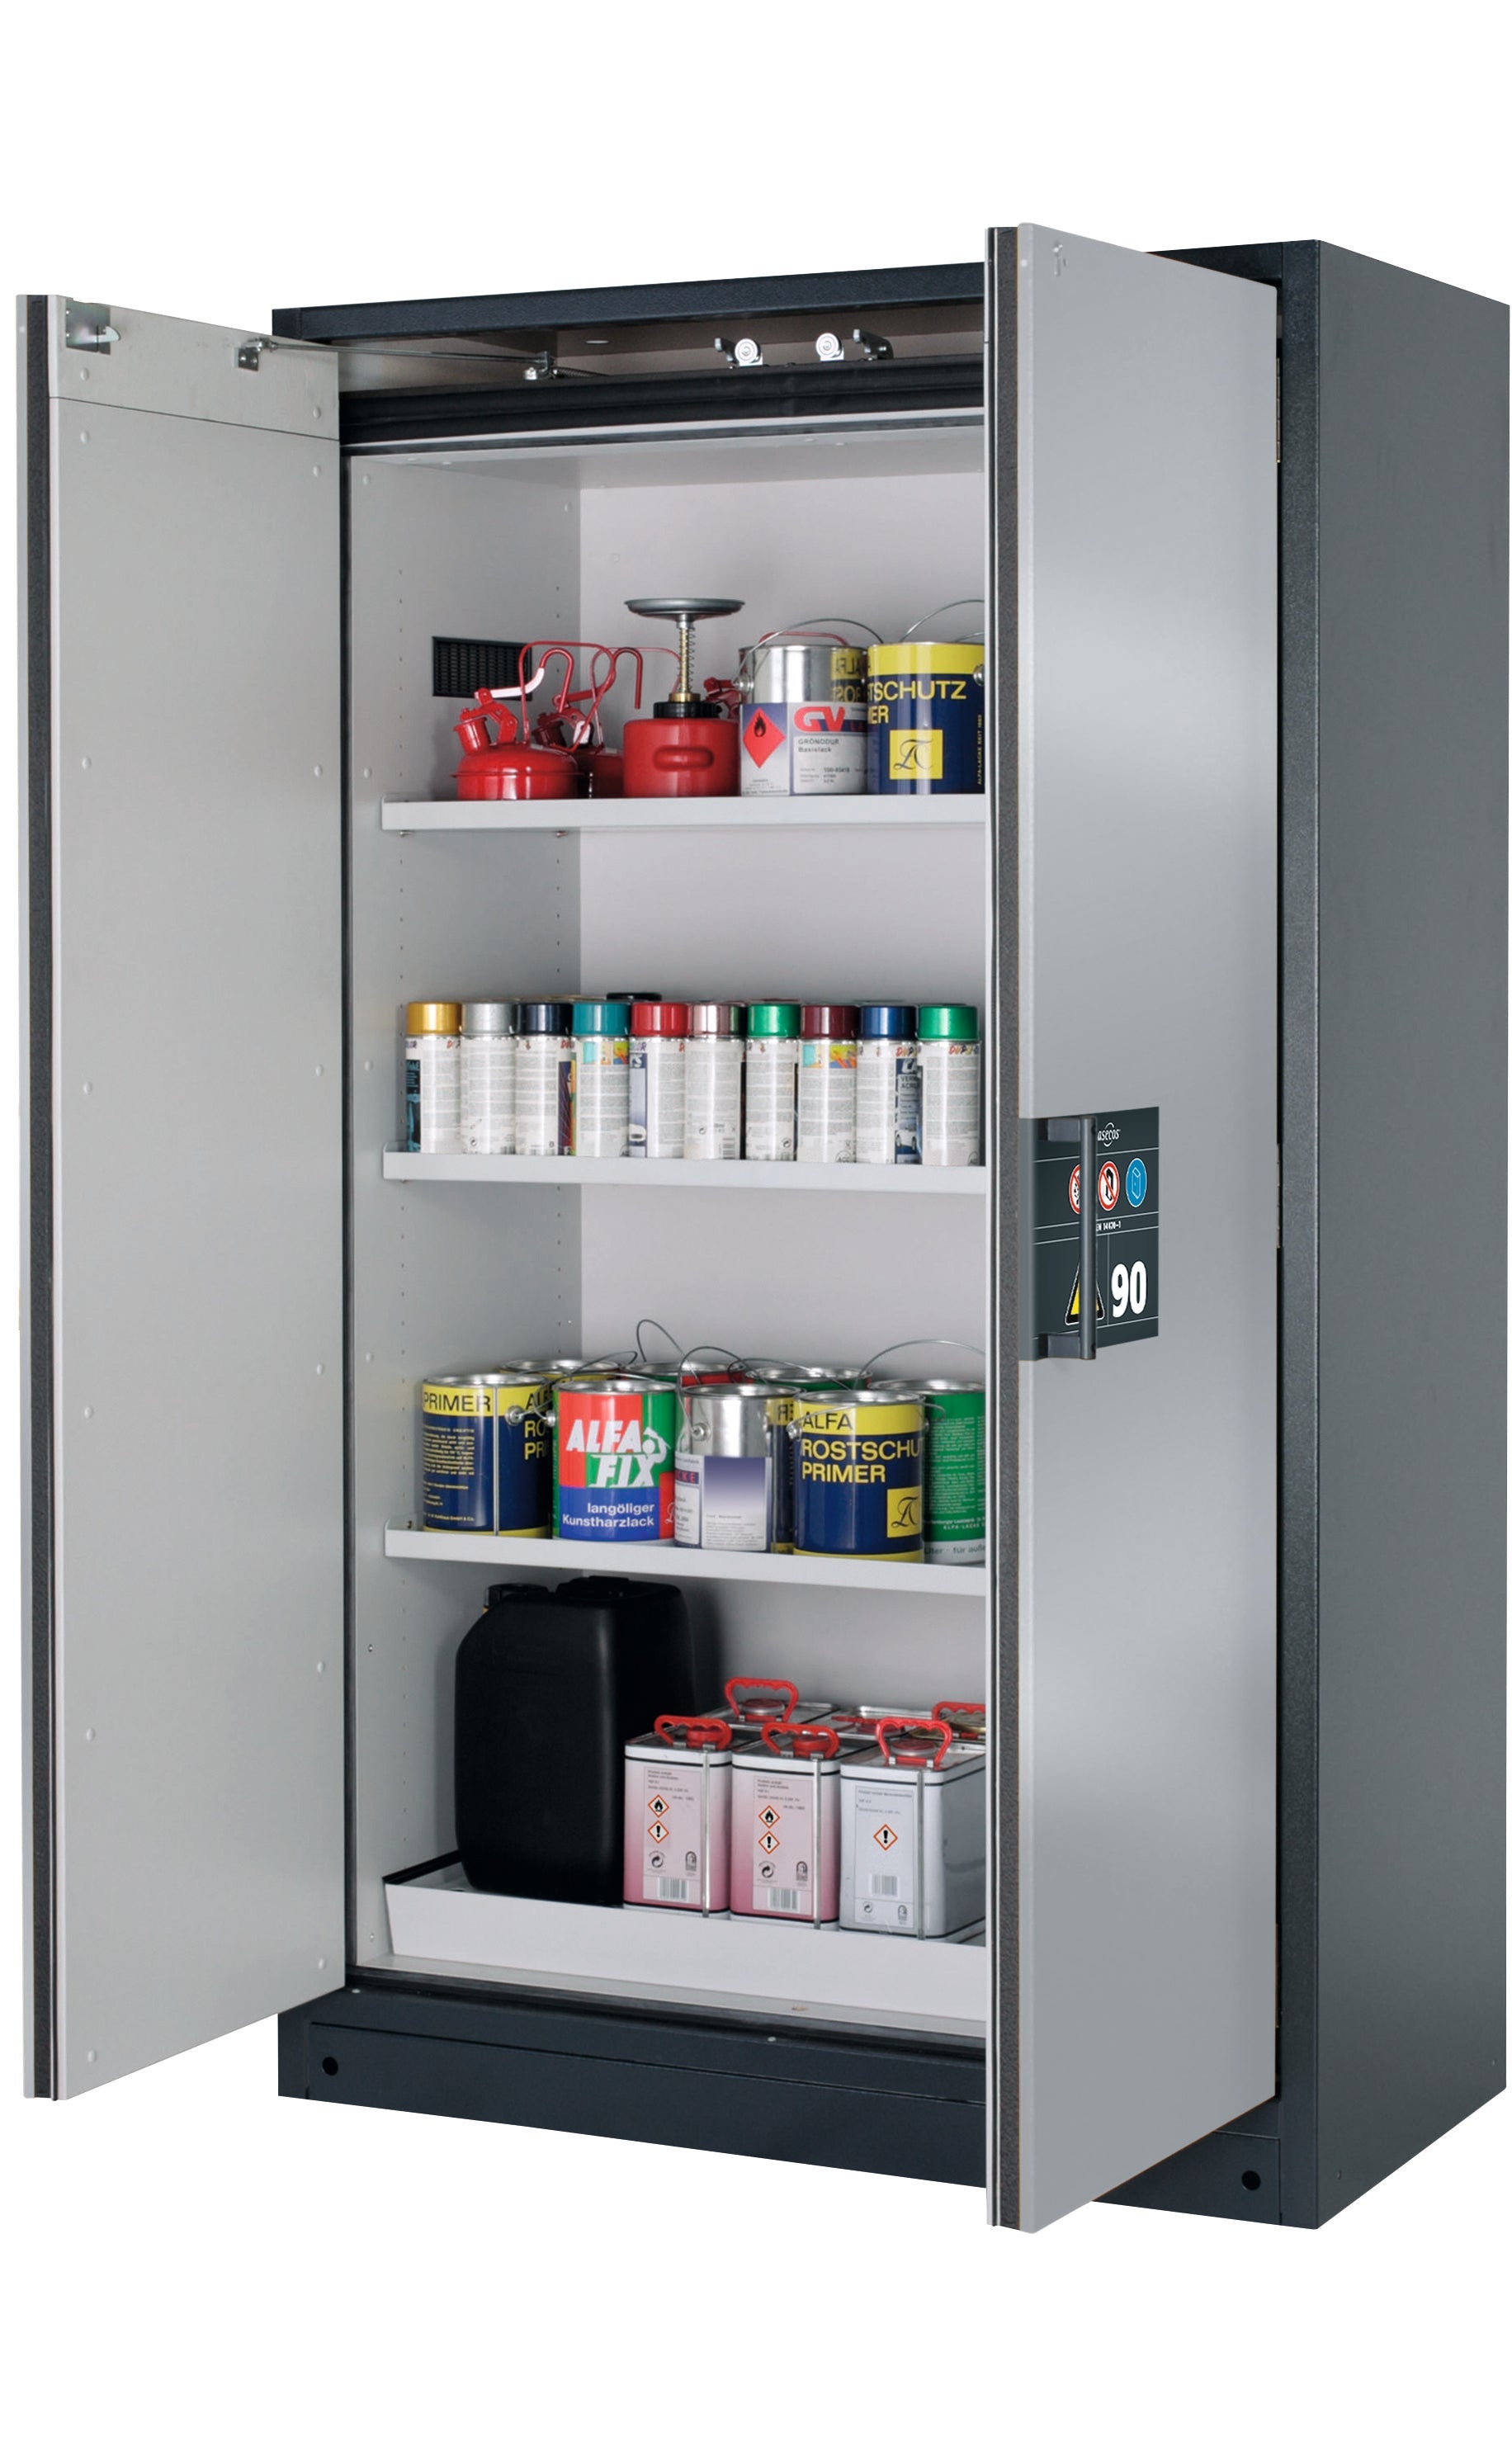 Type 90 safety storage cabinet Q-CLASSIC-90 model Q90.195.120 in asecos silver with 3x shelf standard (sheet steel),